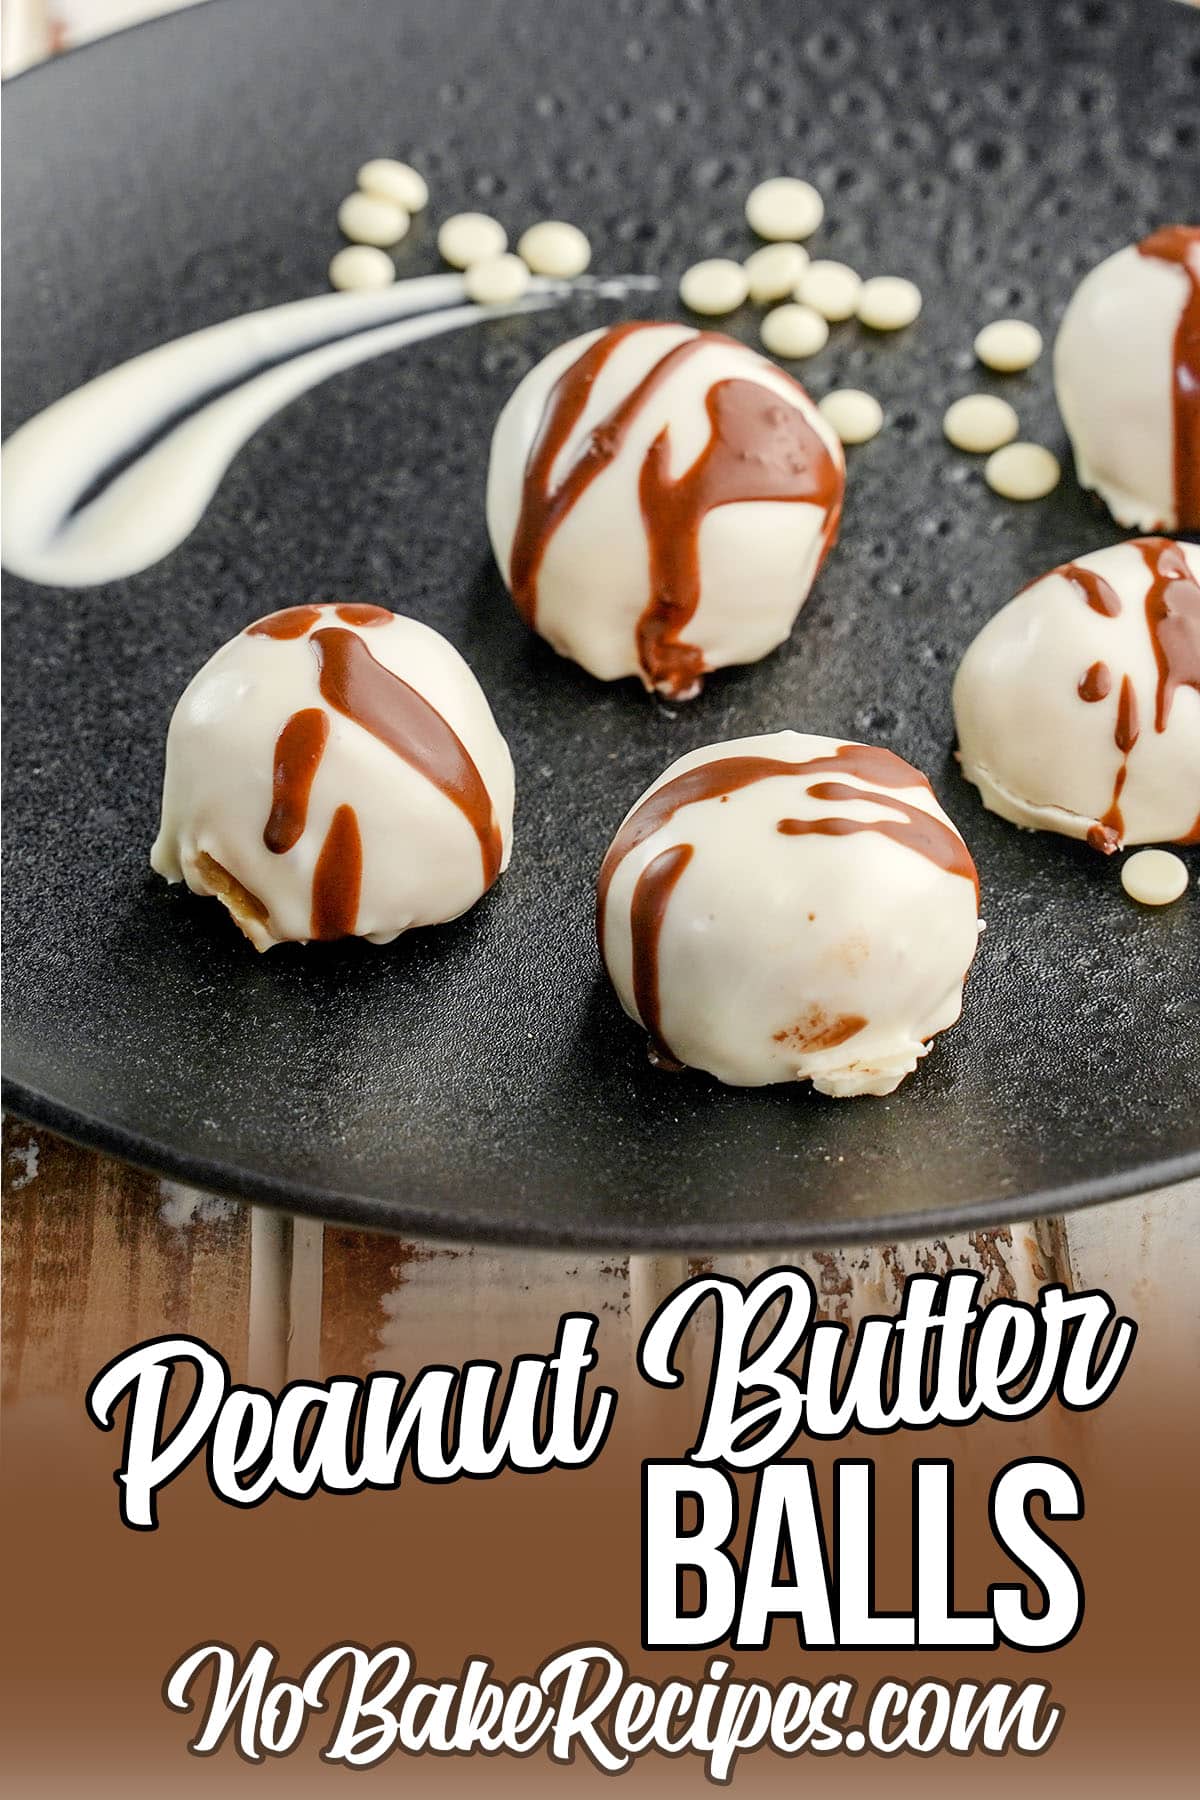 White Chocolate covered Peanut Butter Balls.